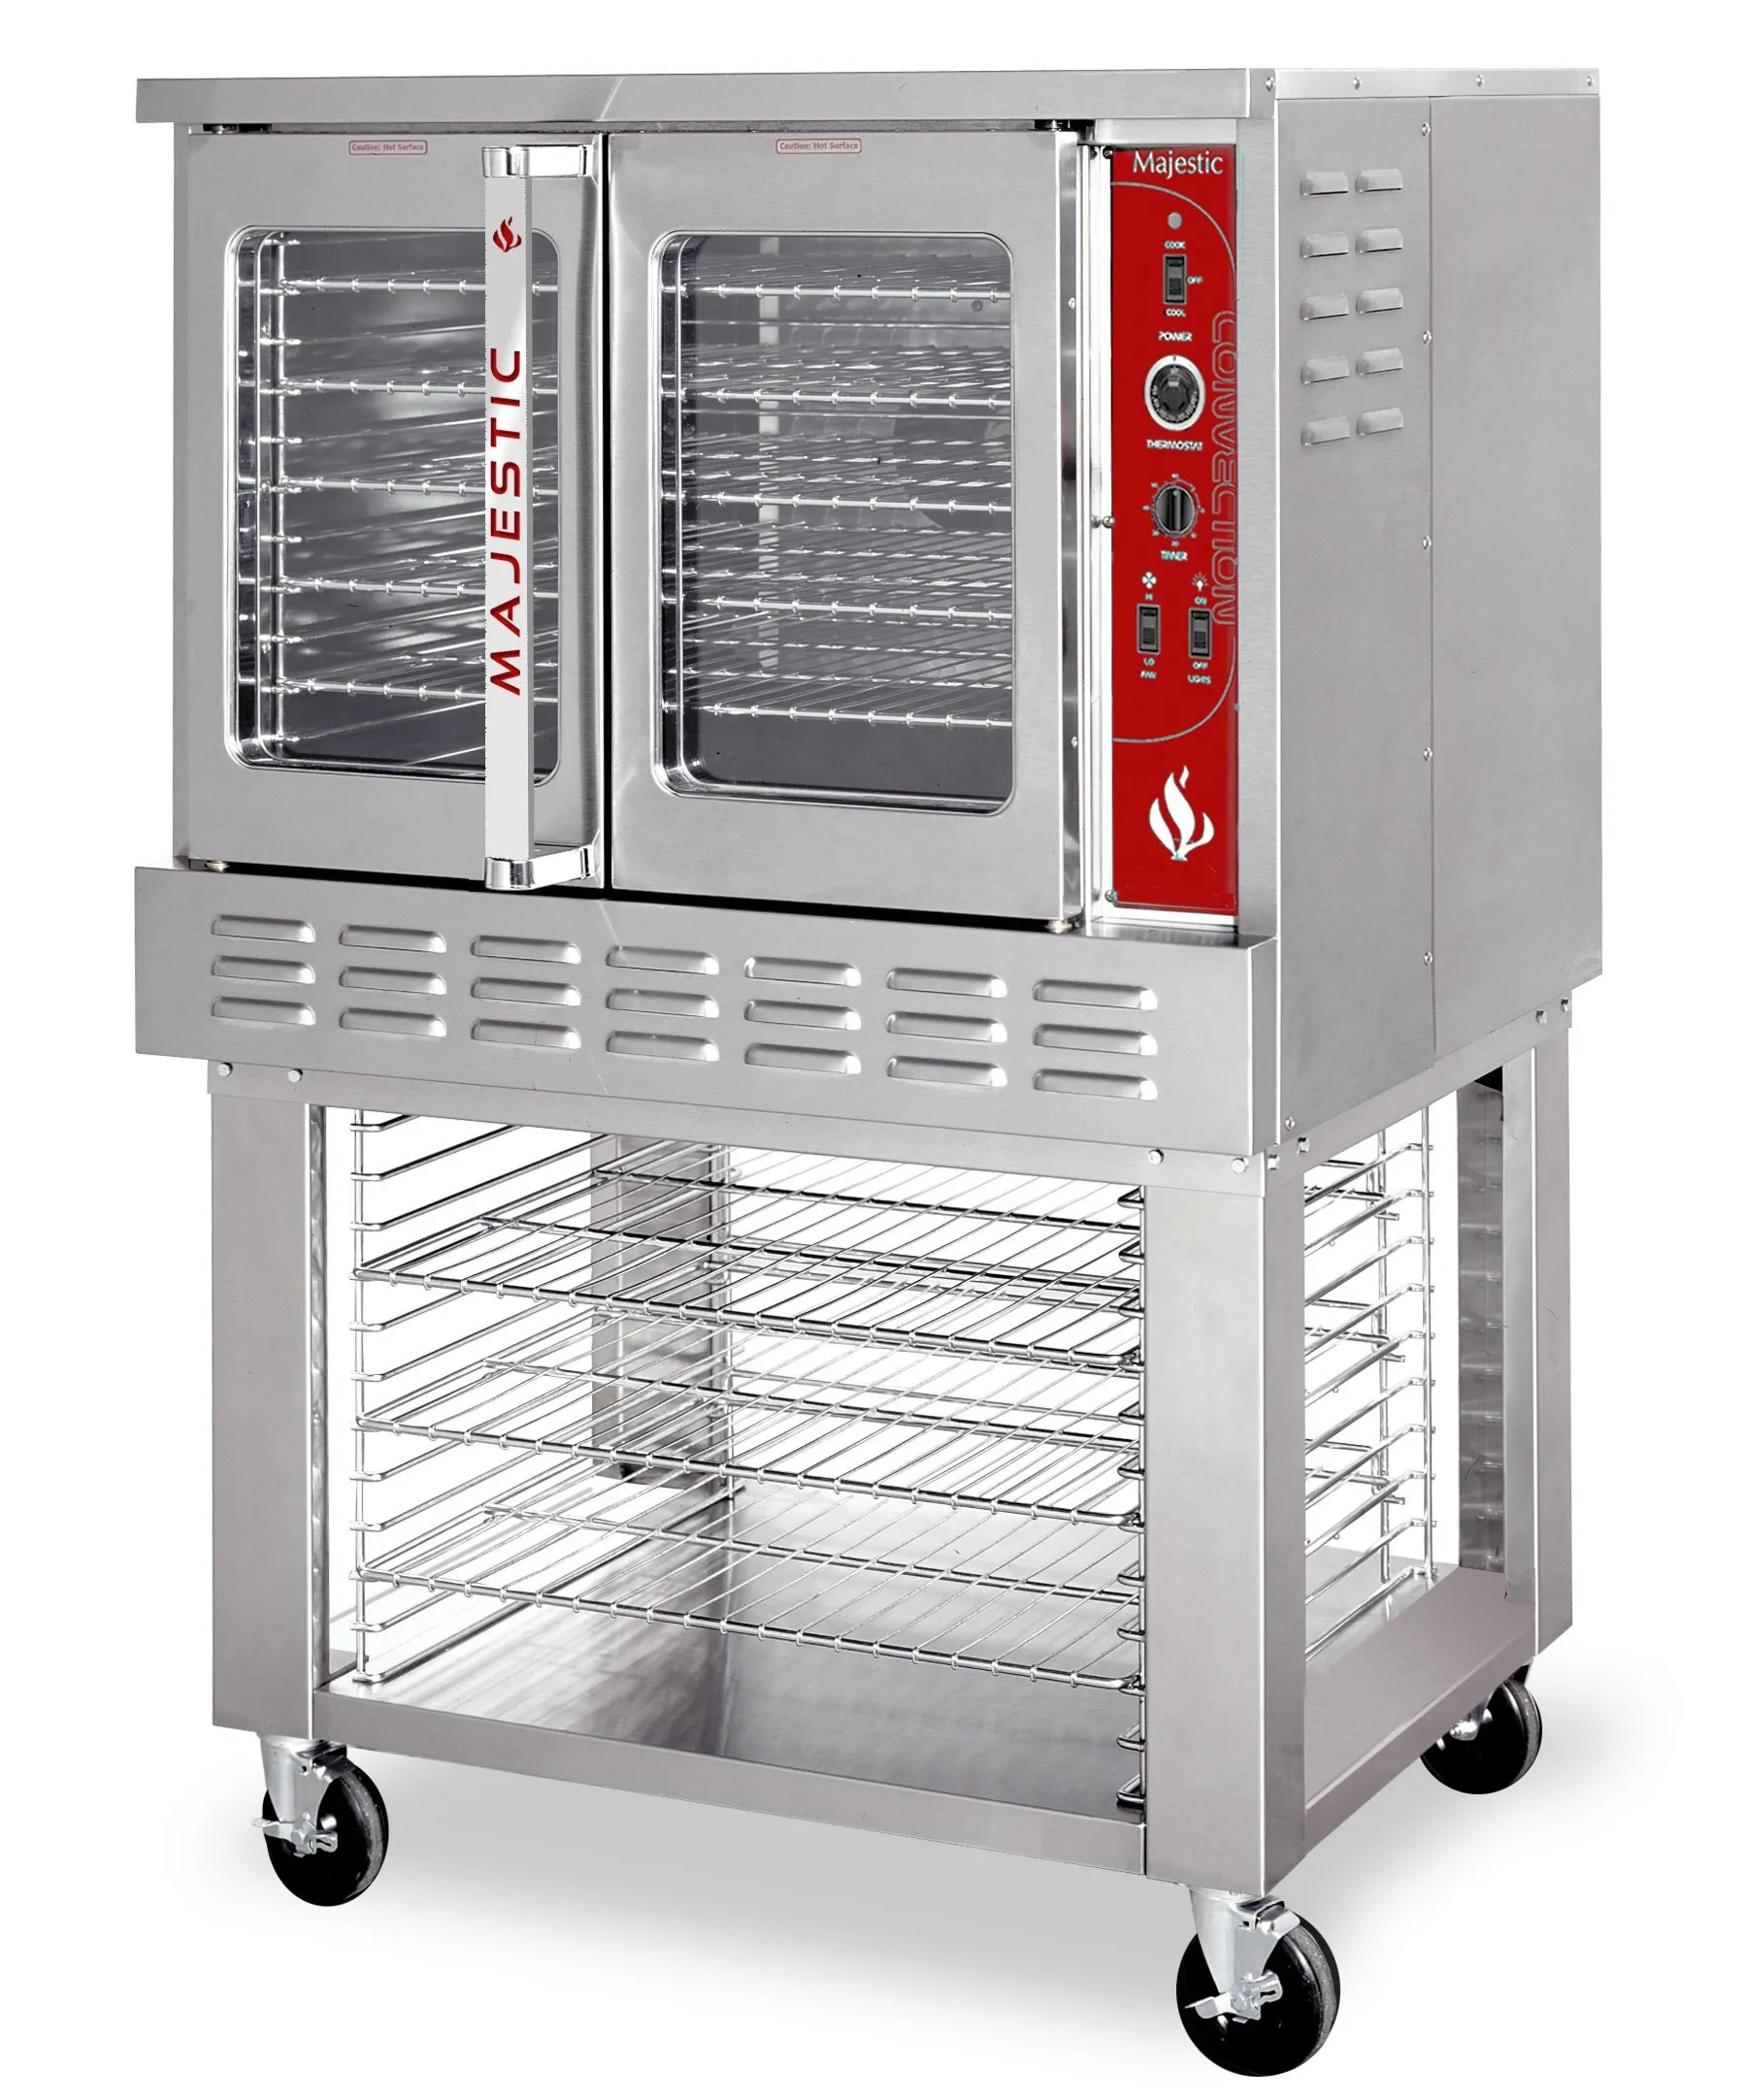 American Range Majestic MSD1GG Gas Convection Oven